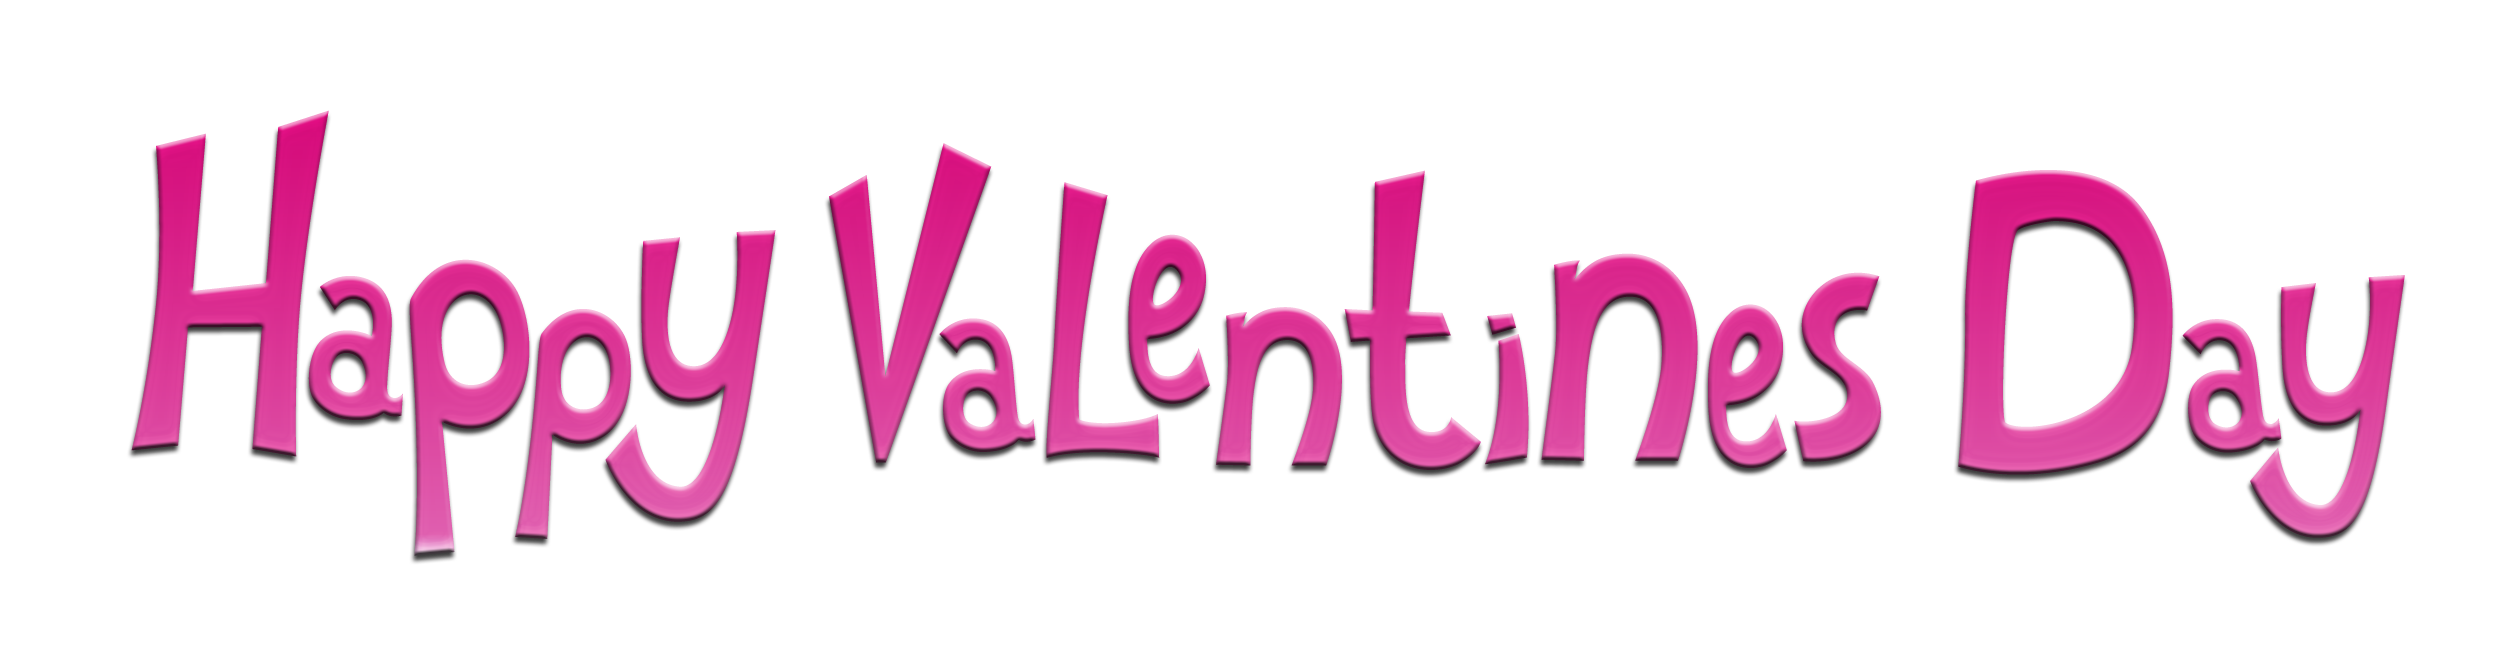 free happy valentines day clipart - photo #9